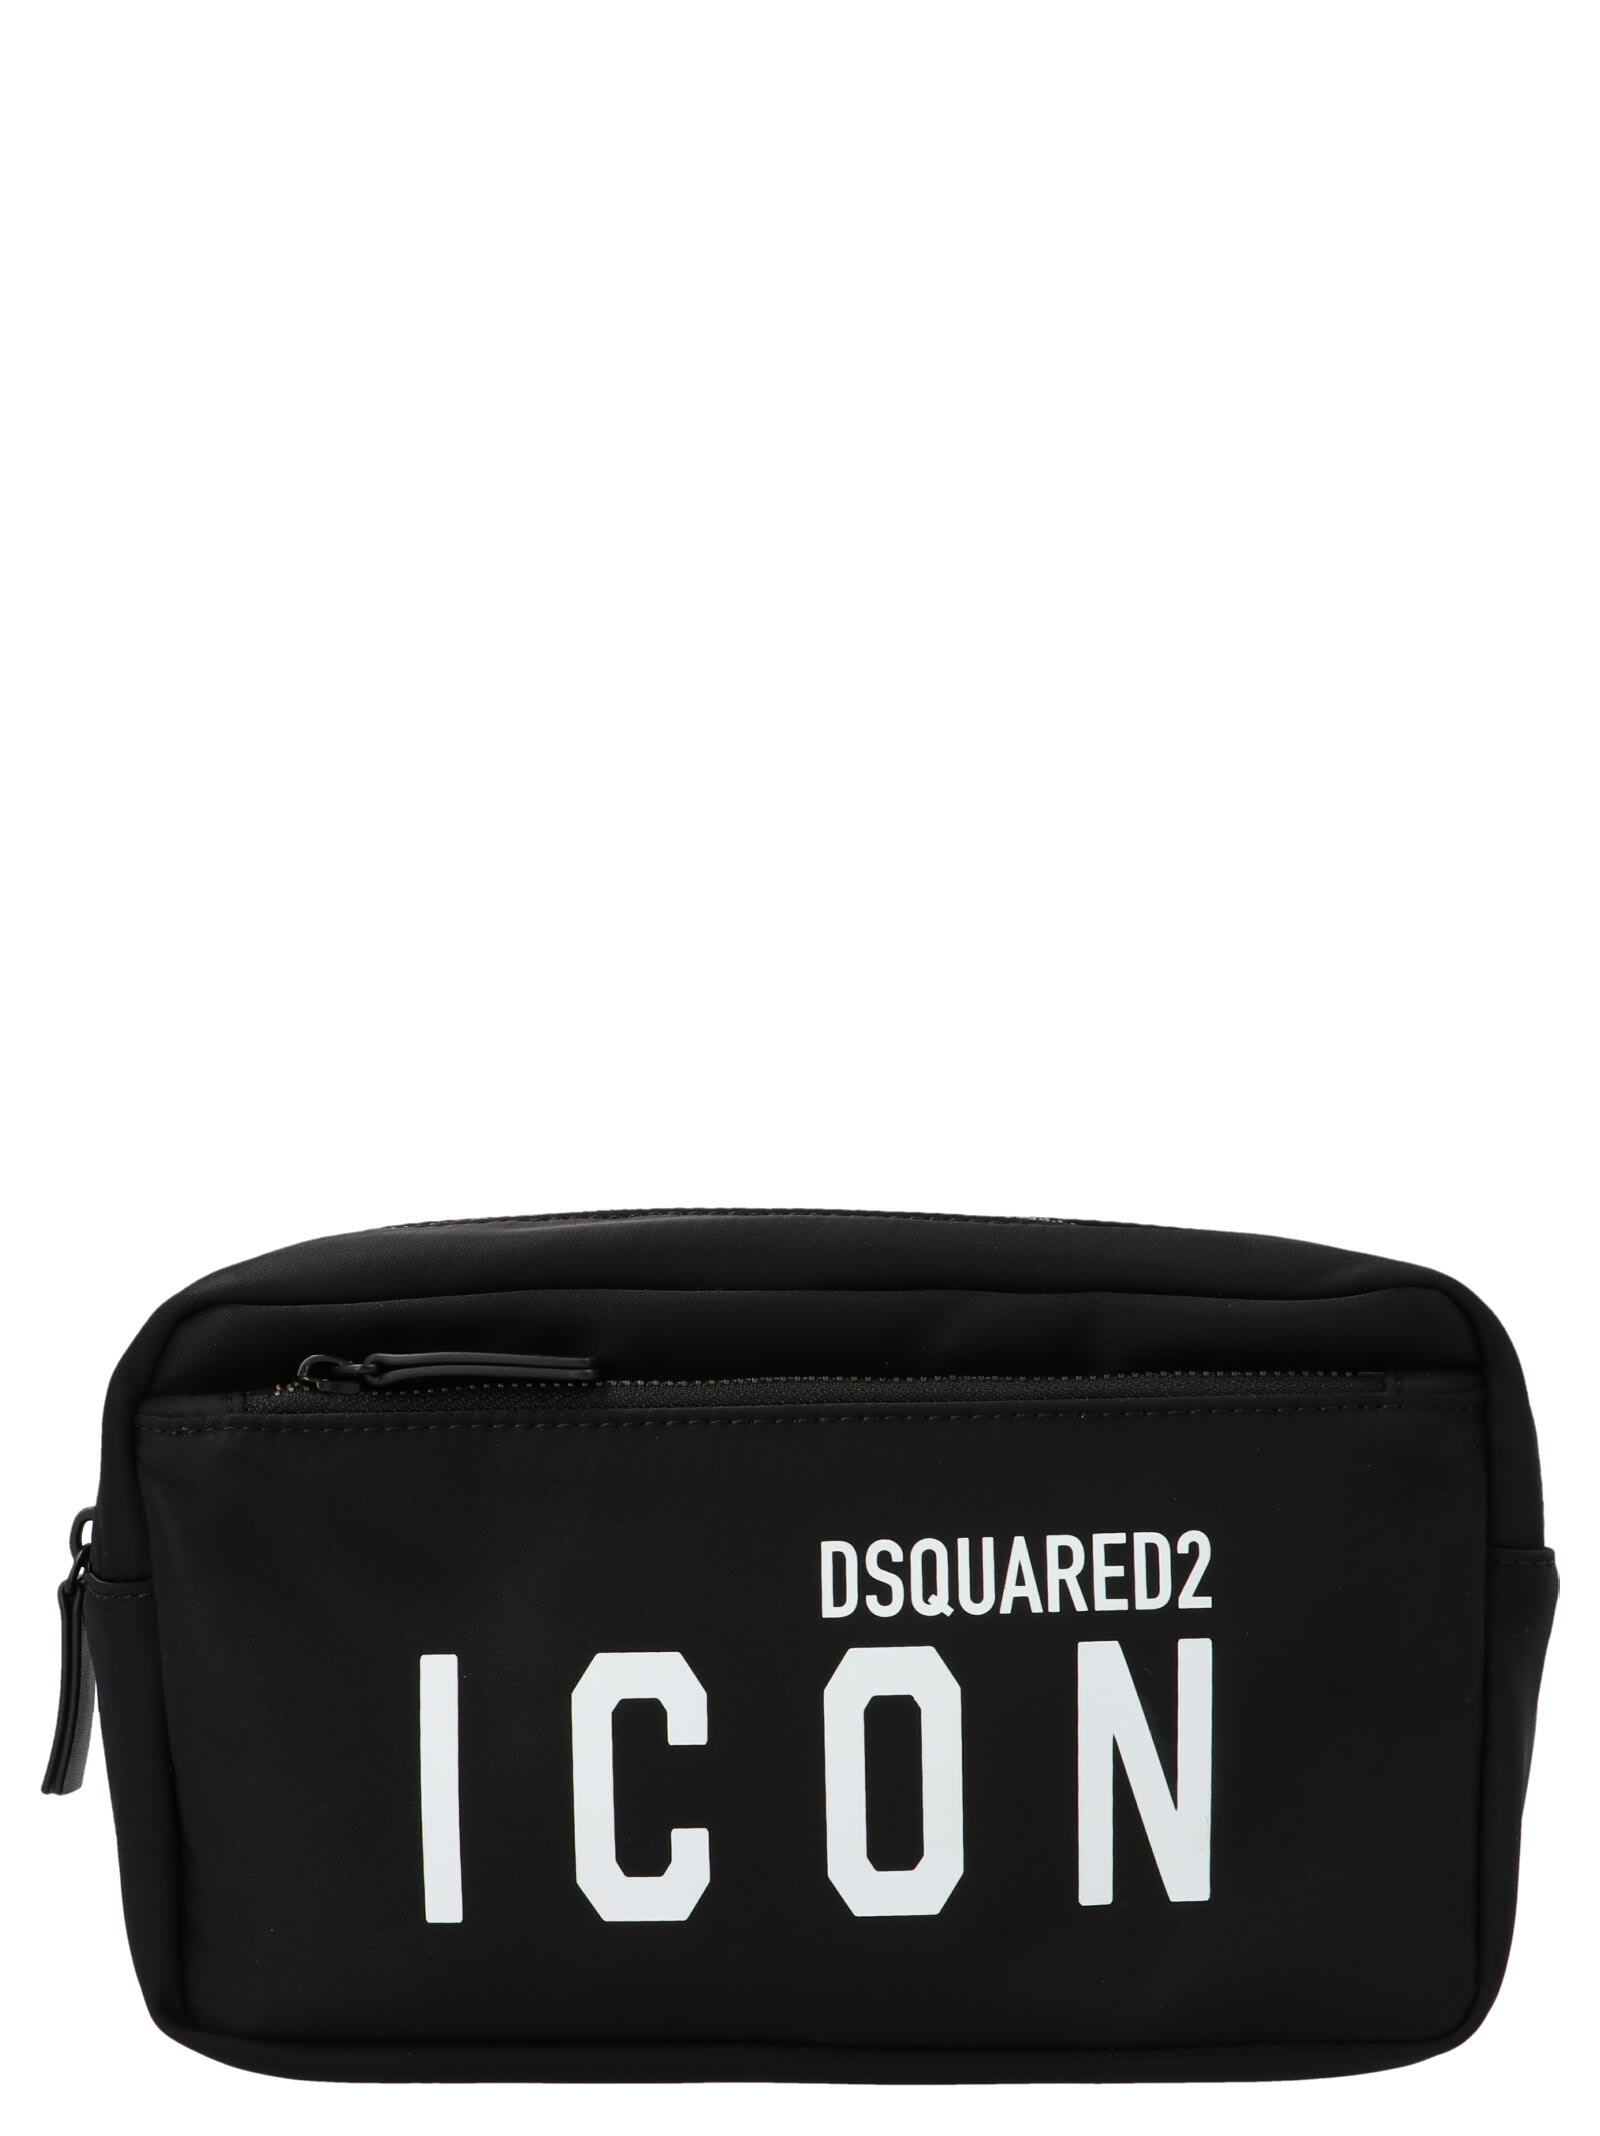 Dsquared2 icon Beauty